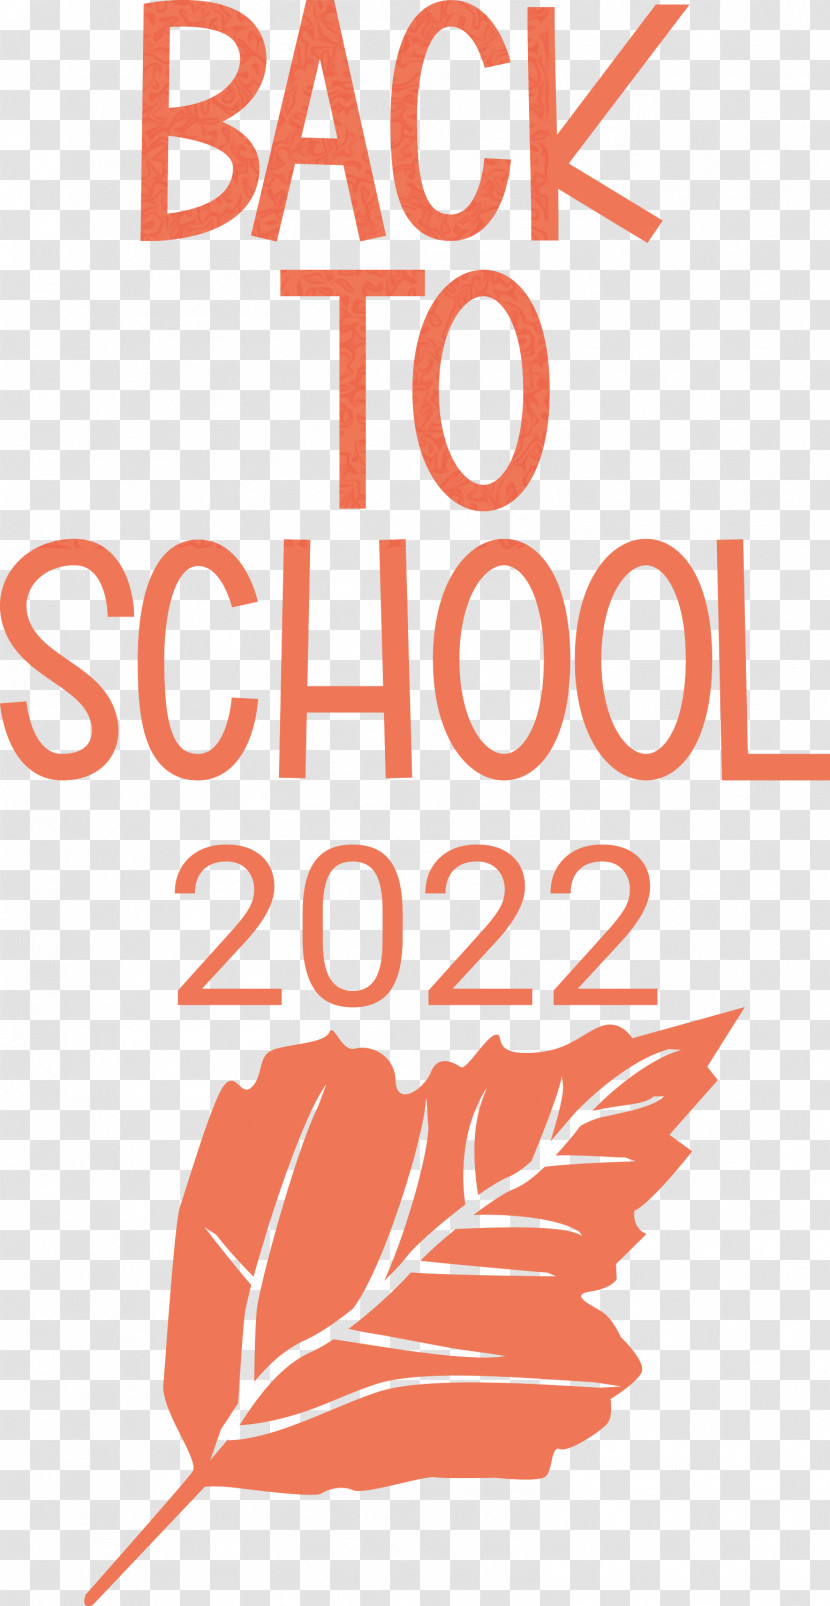 Back To School 2022 Transparent PNG